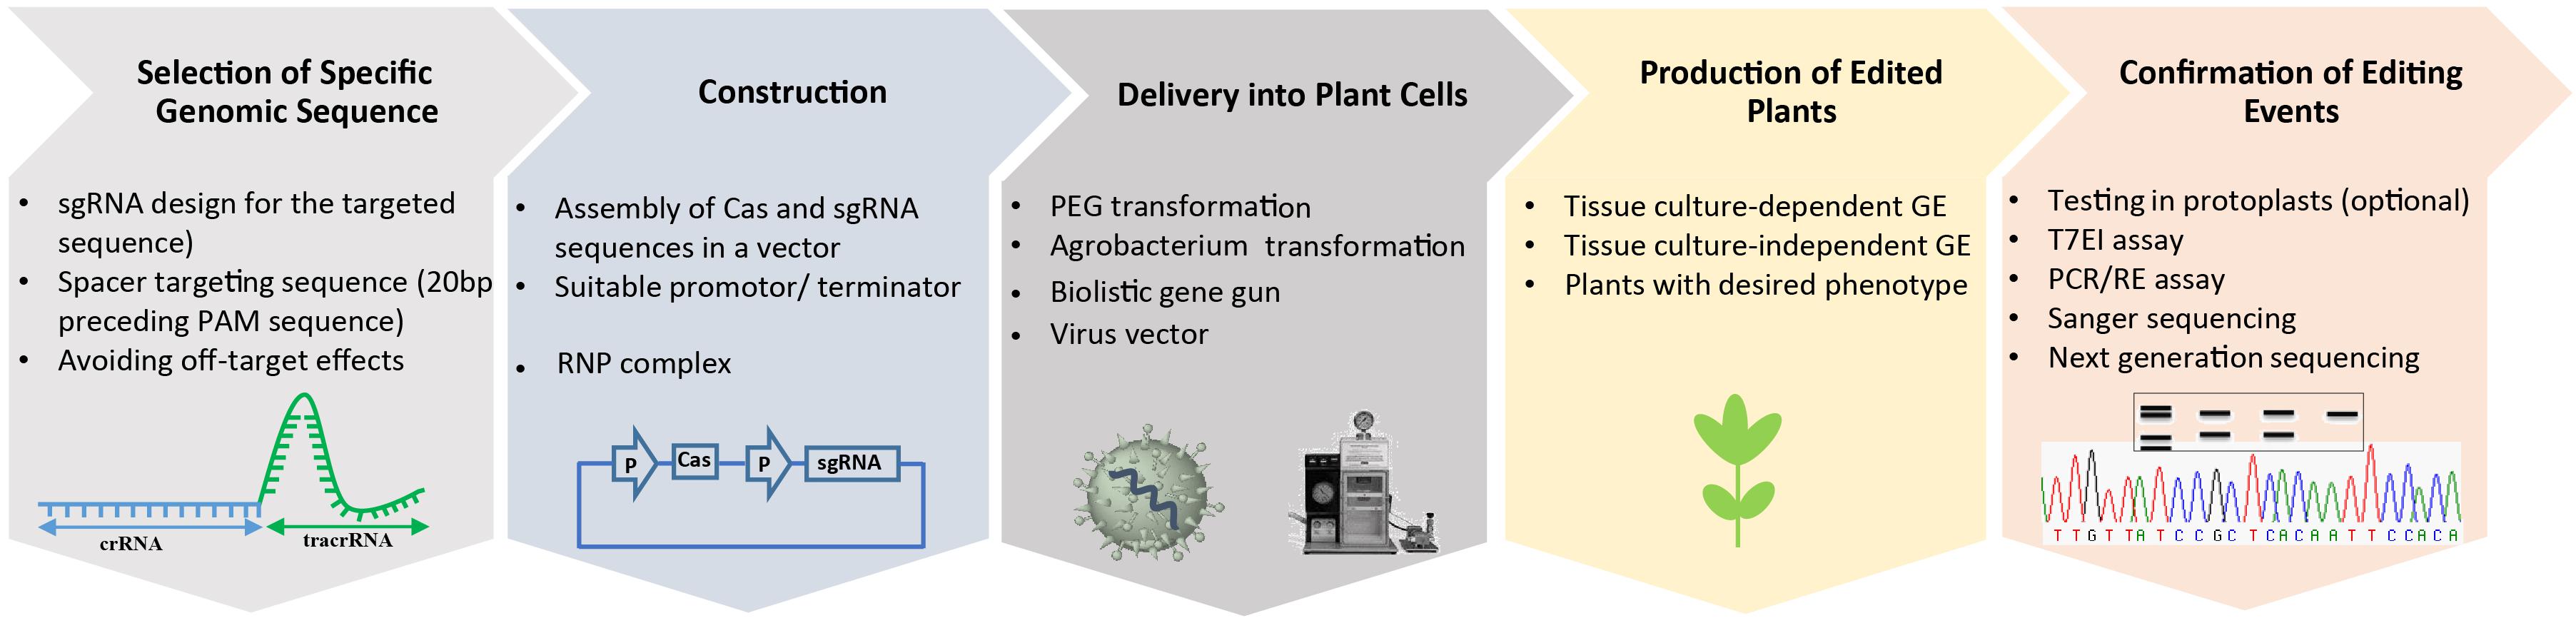 Frontiers Plant Genome Engineering For Targeted Improvement Of